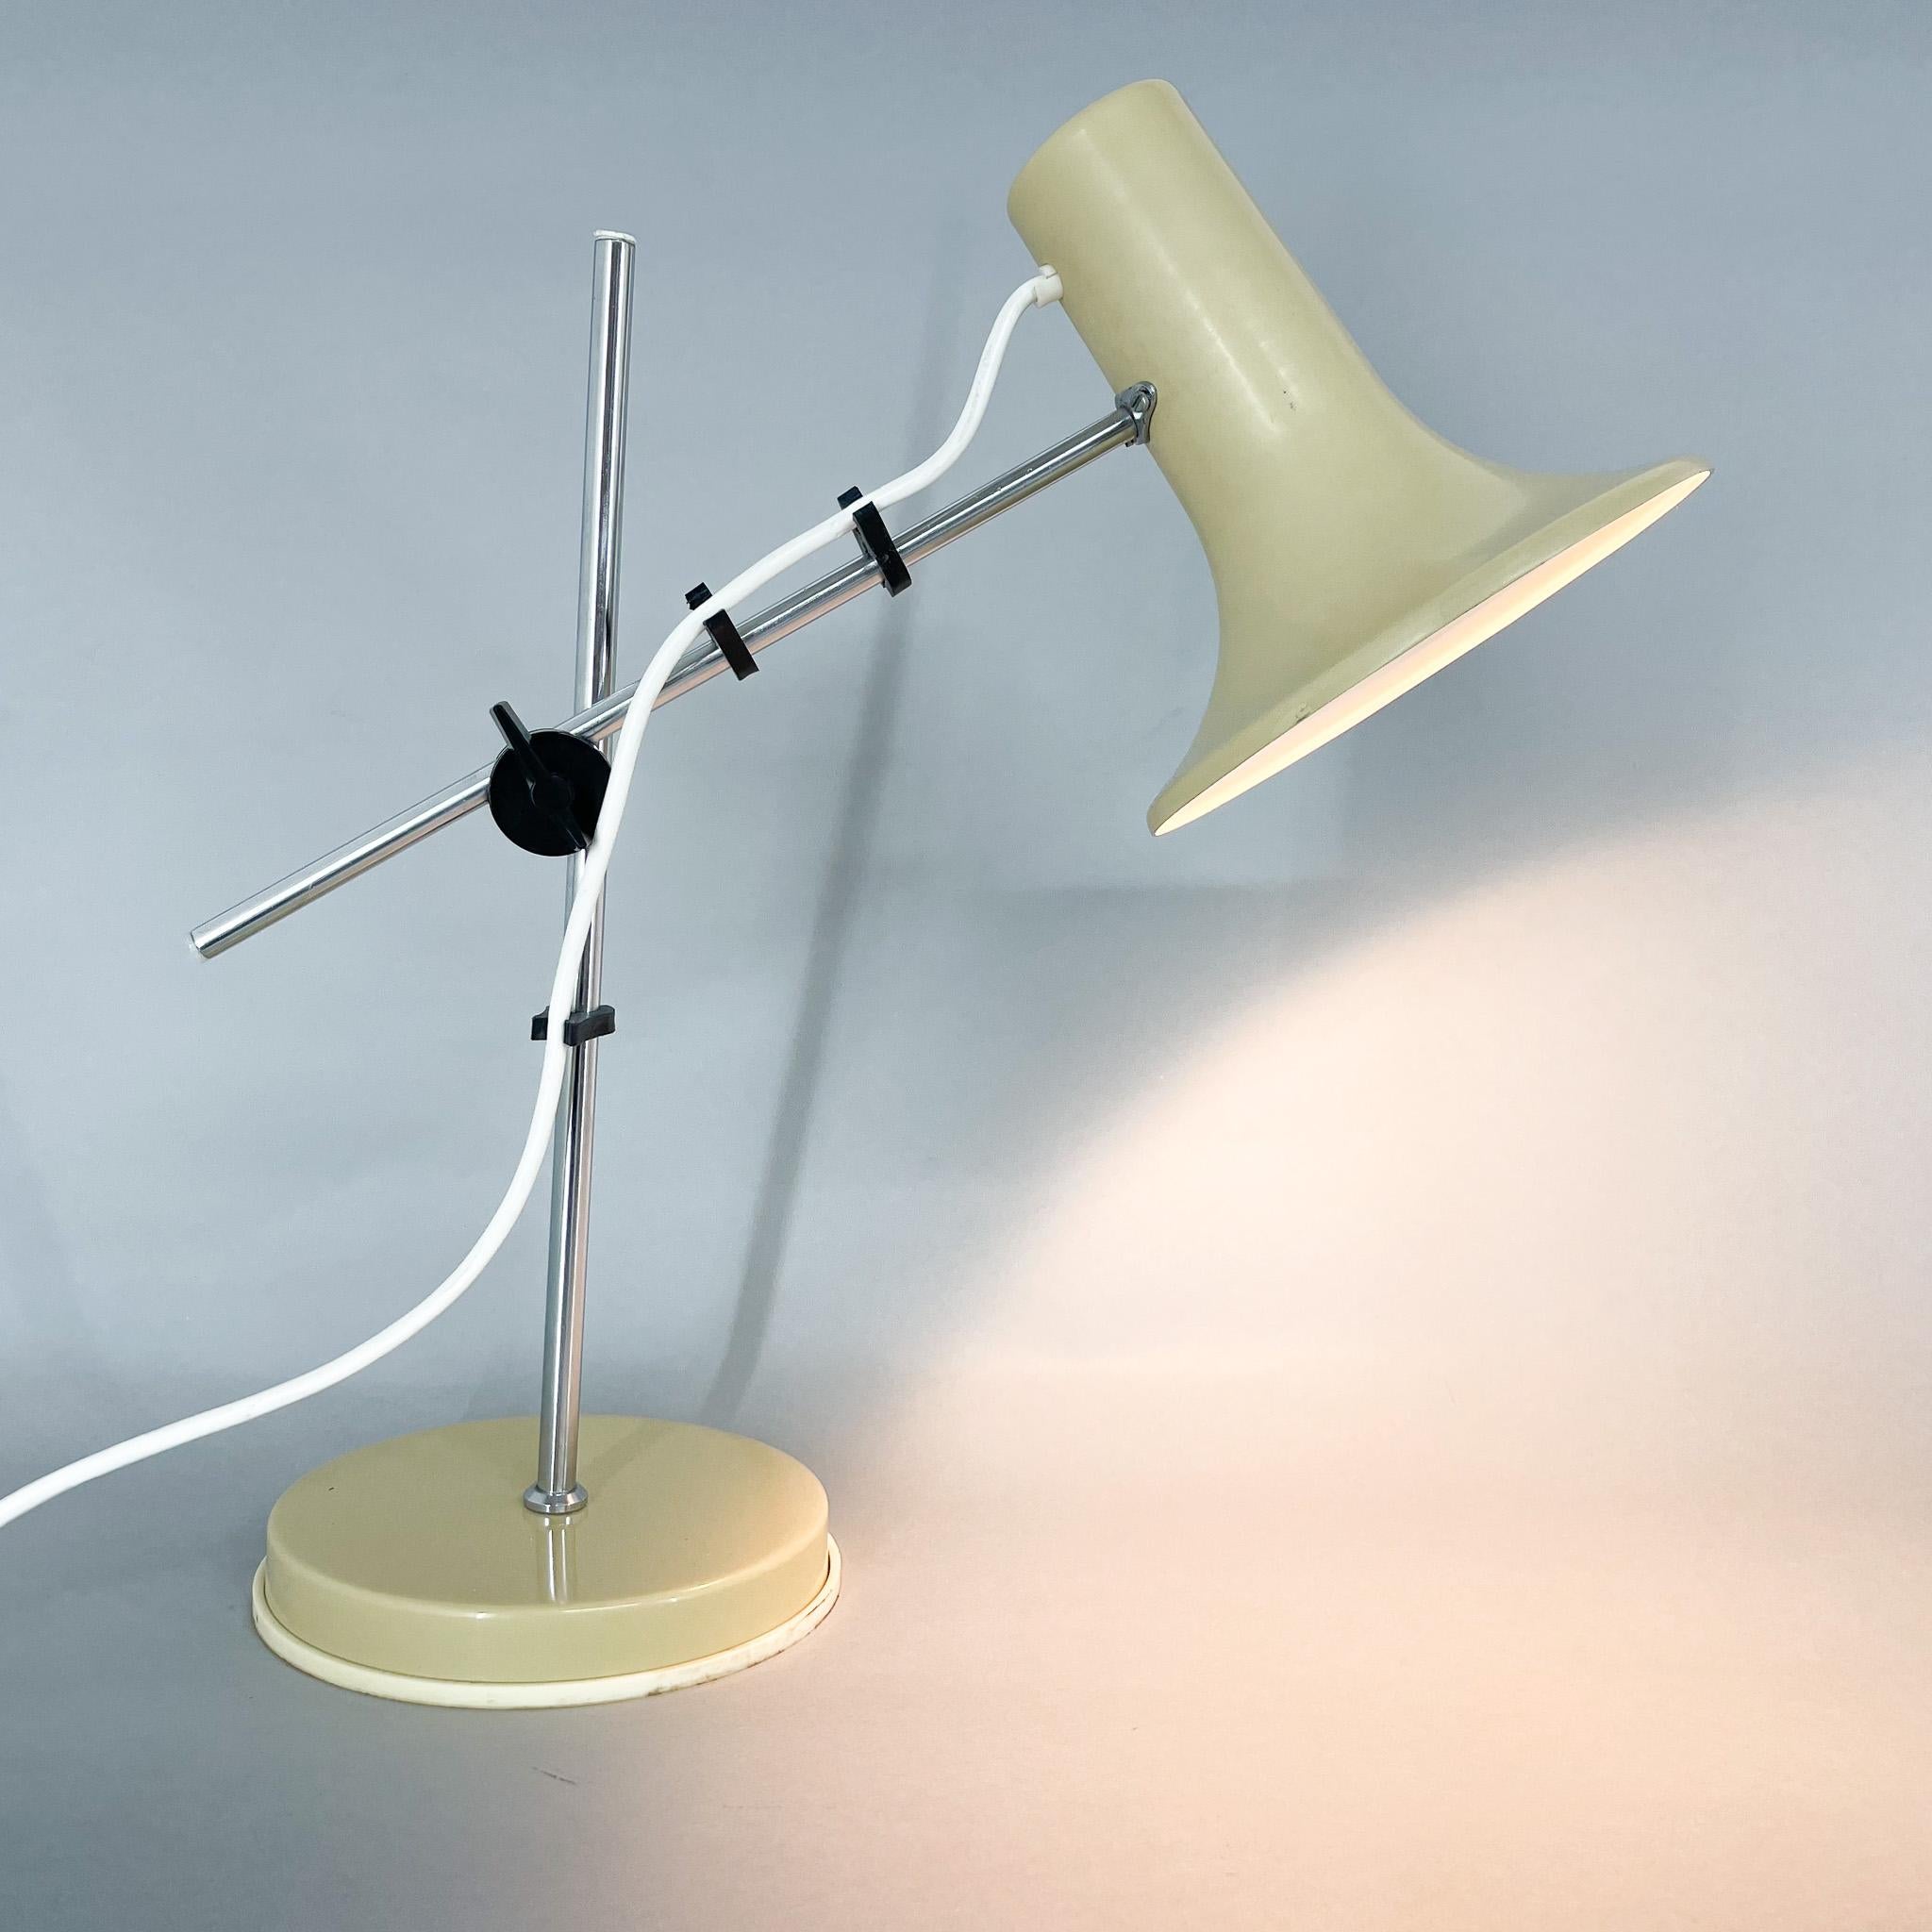 1970s Adjustable Metal Table Lamp in Creamy Color, Hungary For Sale 7